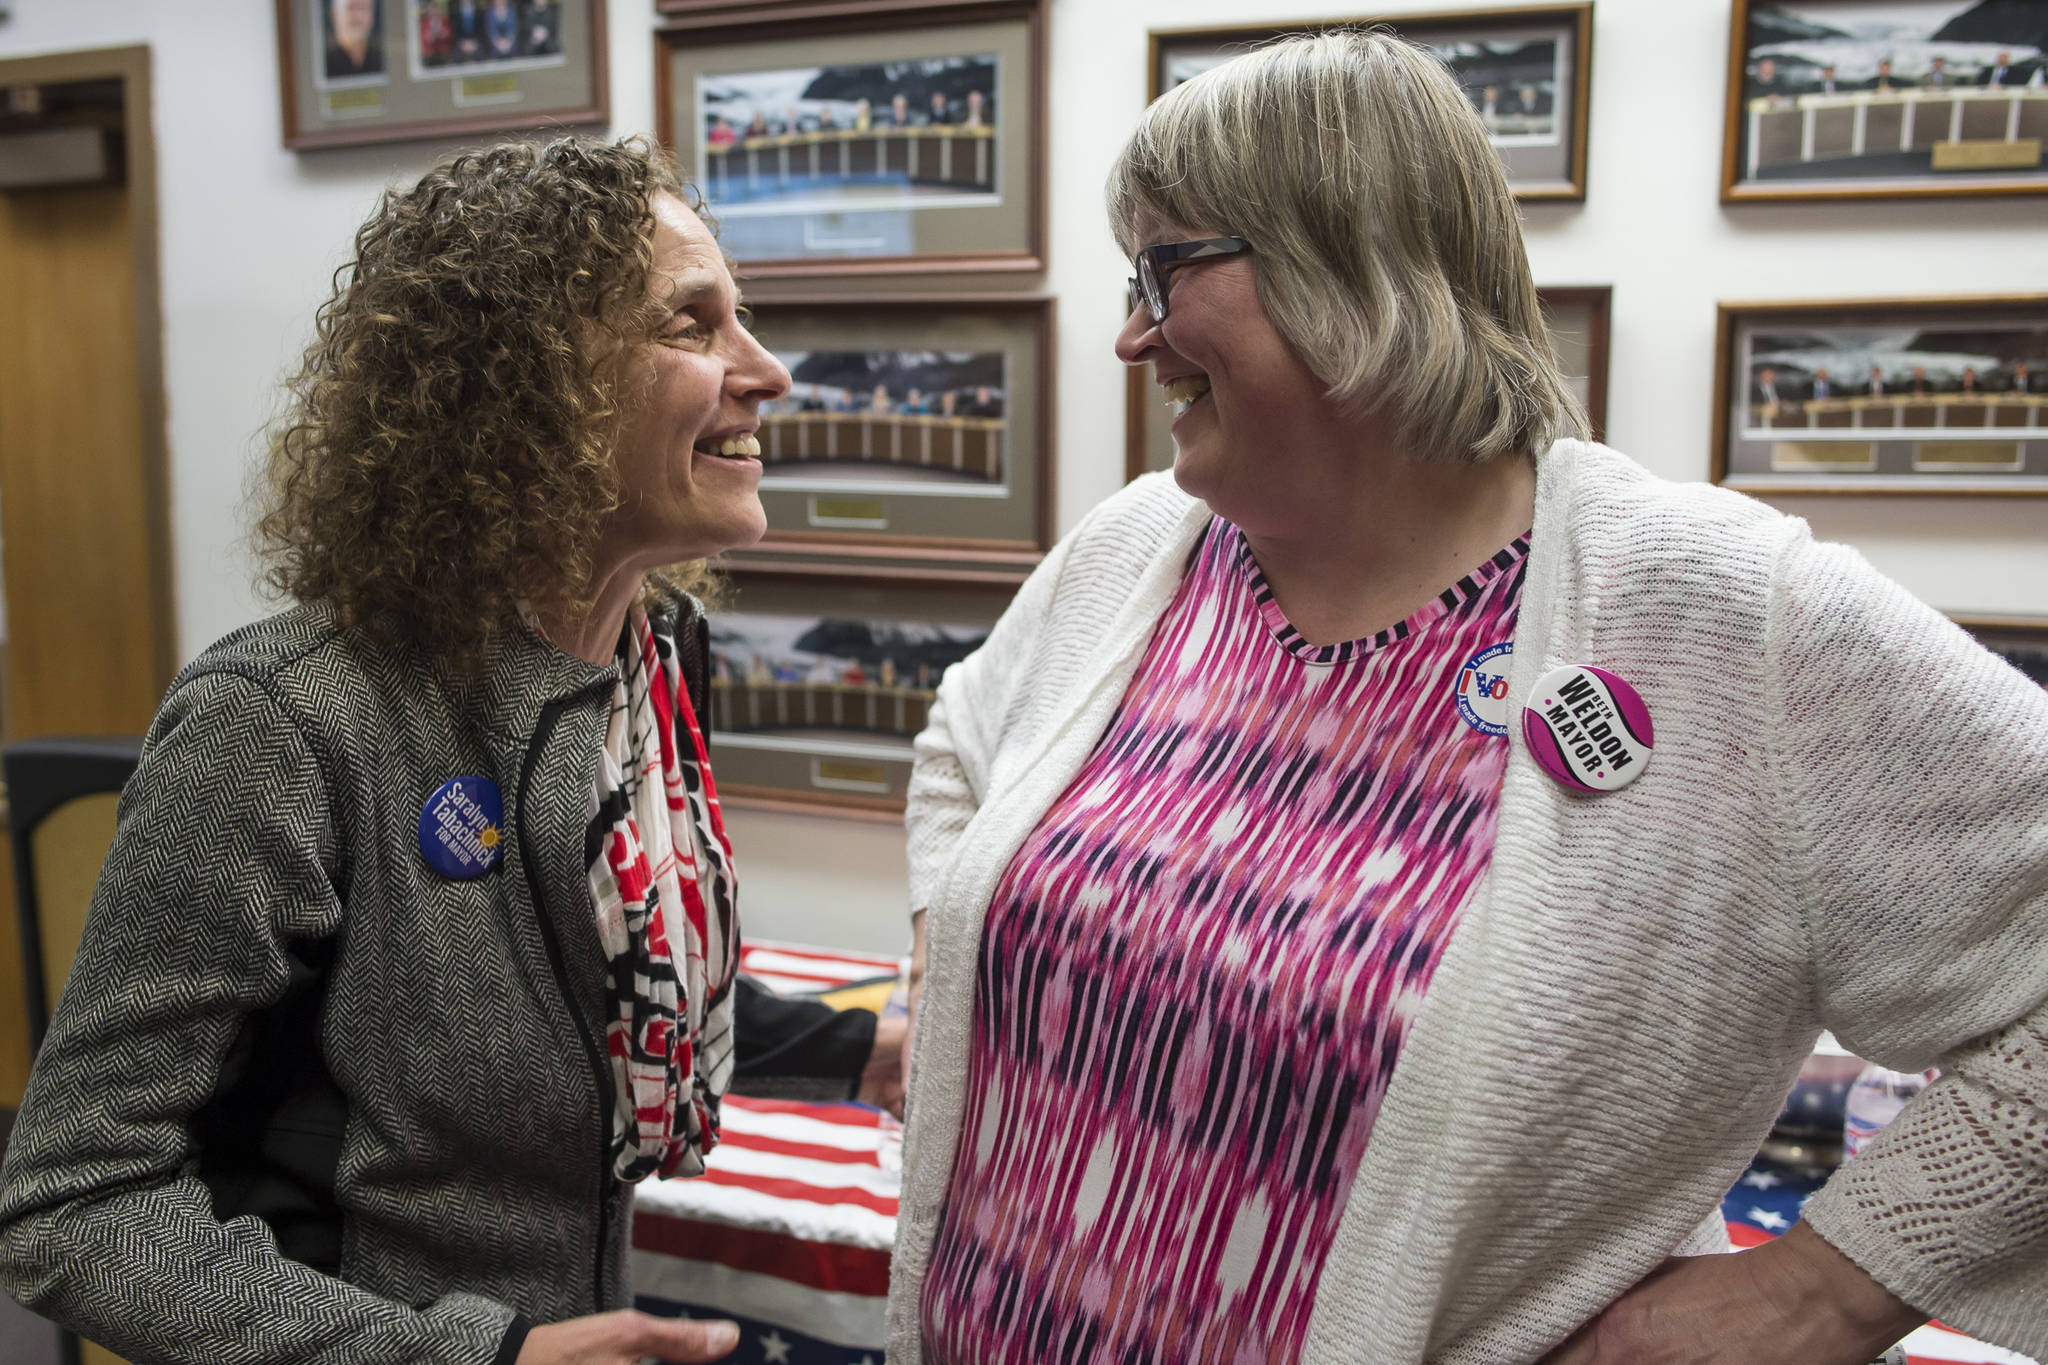 Mayoral candidate Saralyn Tabachnick, left, congratulates Mayor-elect Beth Weldon after watching Election results come in at the Assembly chambers on Tuesday, Oct. 2, 2018. (Michael Penn | Juneau Empire)